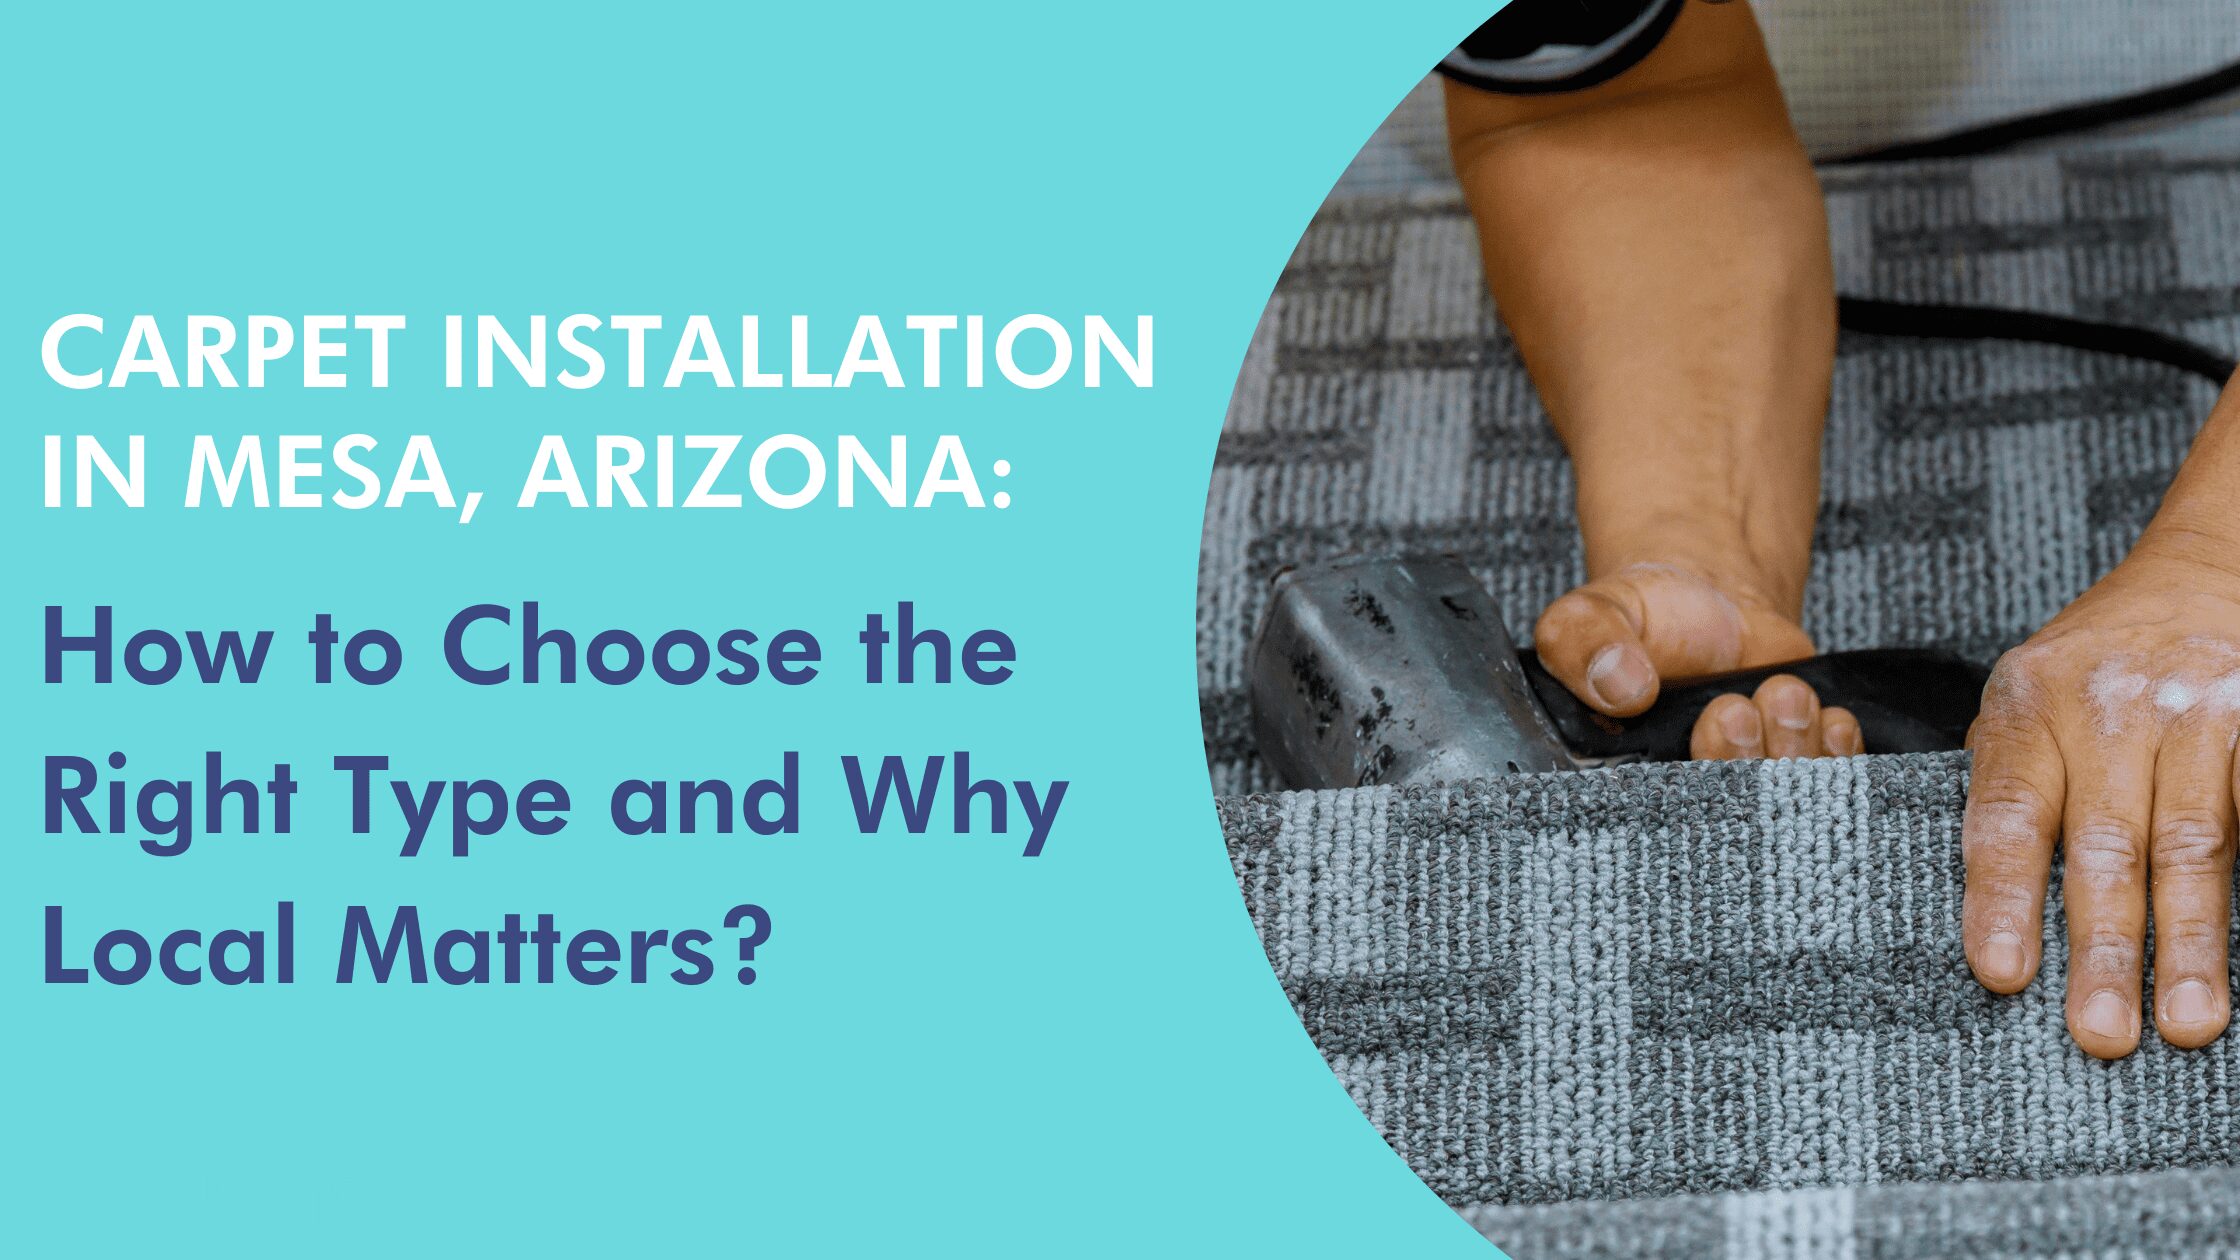 Carpet Installation in Mesa, Arizona: How to Choose the Right Type and Why Local Matters